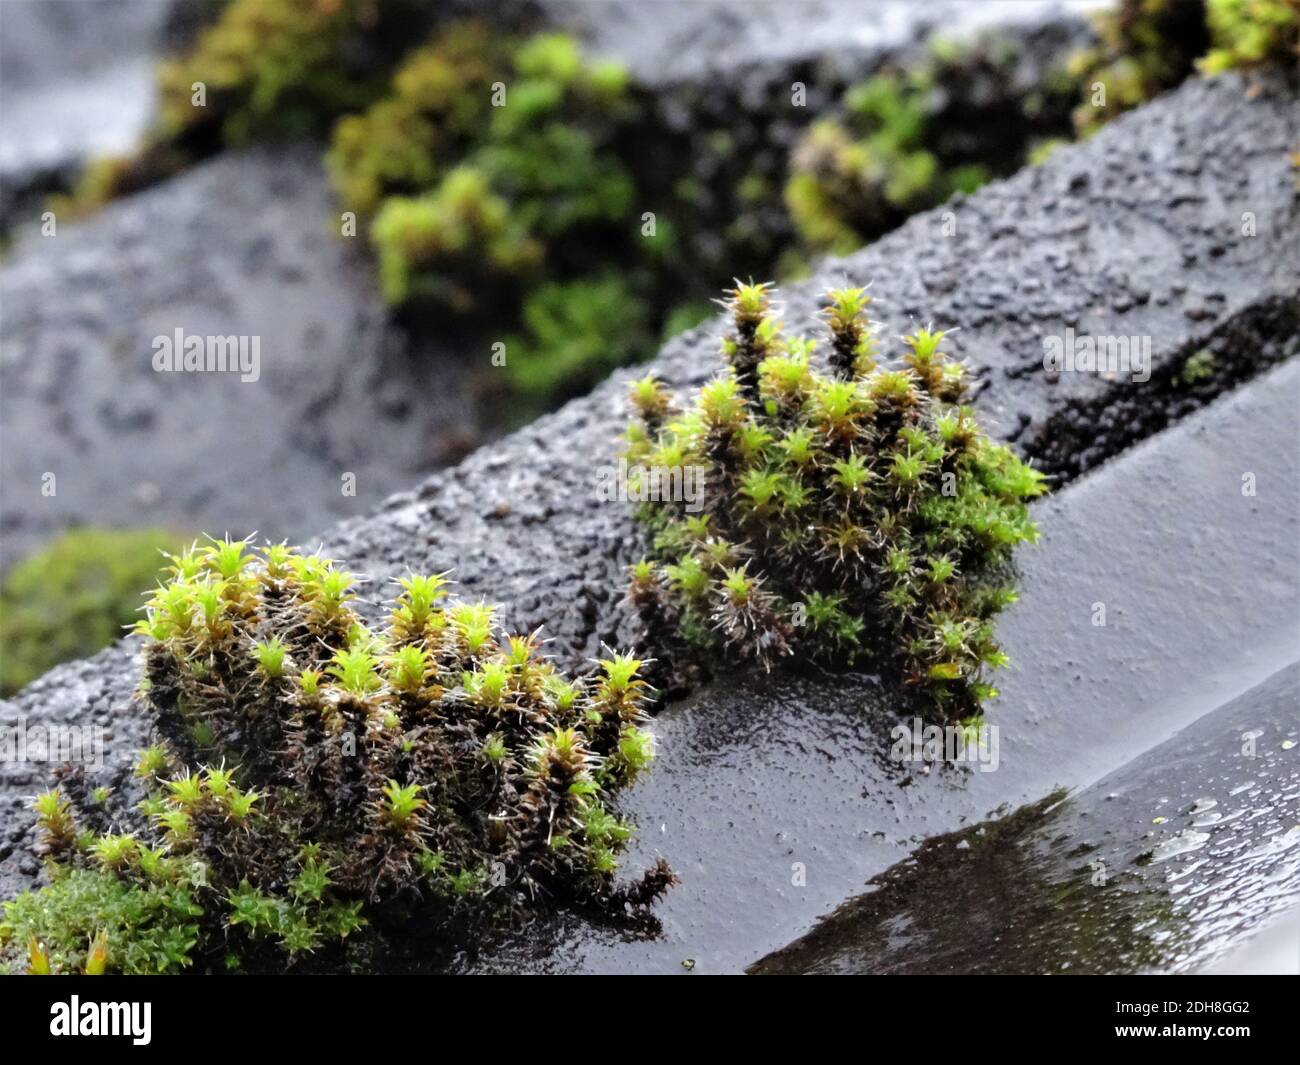 A selective focus shot of Orthotrichum Speciosum growing on the rocky surface Stock Photo